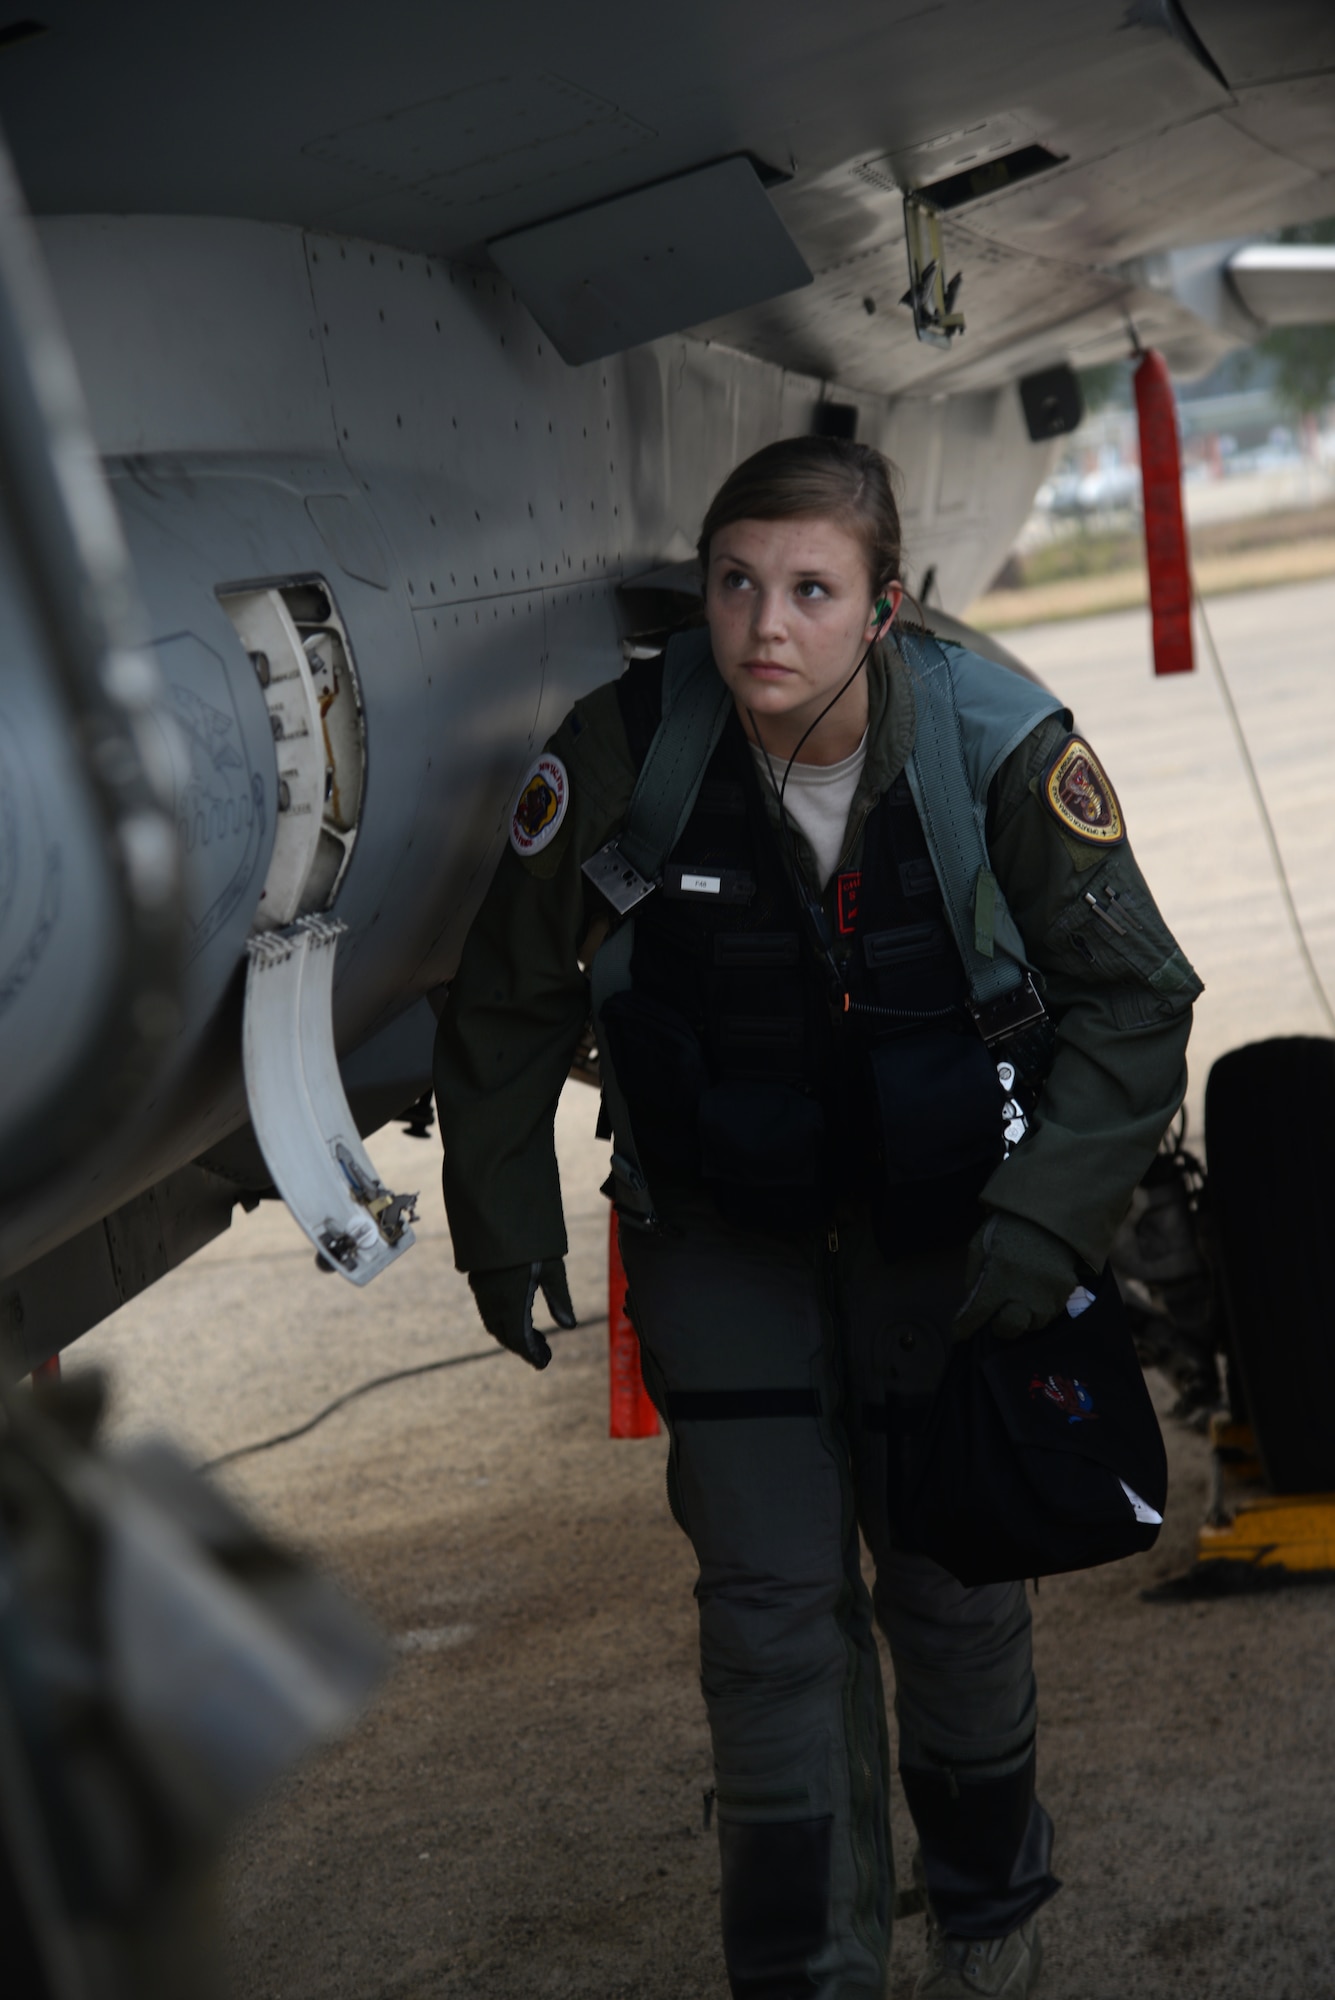 U.S. Air Force 1st Lt. Brittany Trimble, 36th Fighter Squadron pilot, does a preflight inspection of an F-16 Fighting Falcon before takeoff, Feb. 15, 2016, at Korat Royal Thai Air Force Base, Thailand. Trimble is one of only 676 female pilots who serve in the U.S. Air Force. There are 12,823 pilots Air Force wide. (U.S. Air Force photo by Staff Sgt. Amber E. Jacobs)